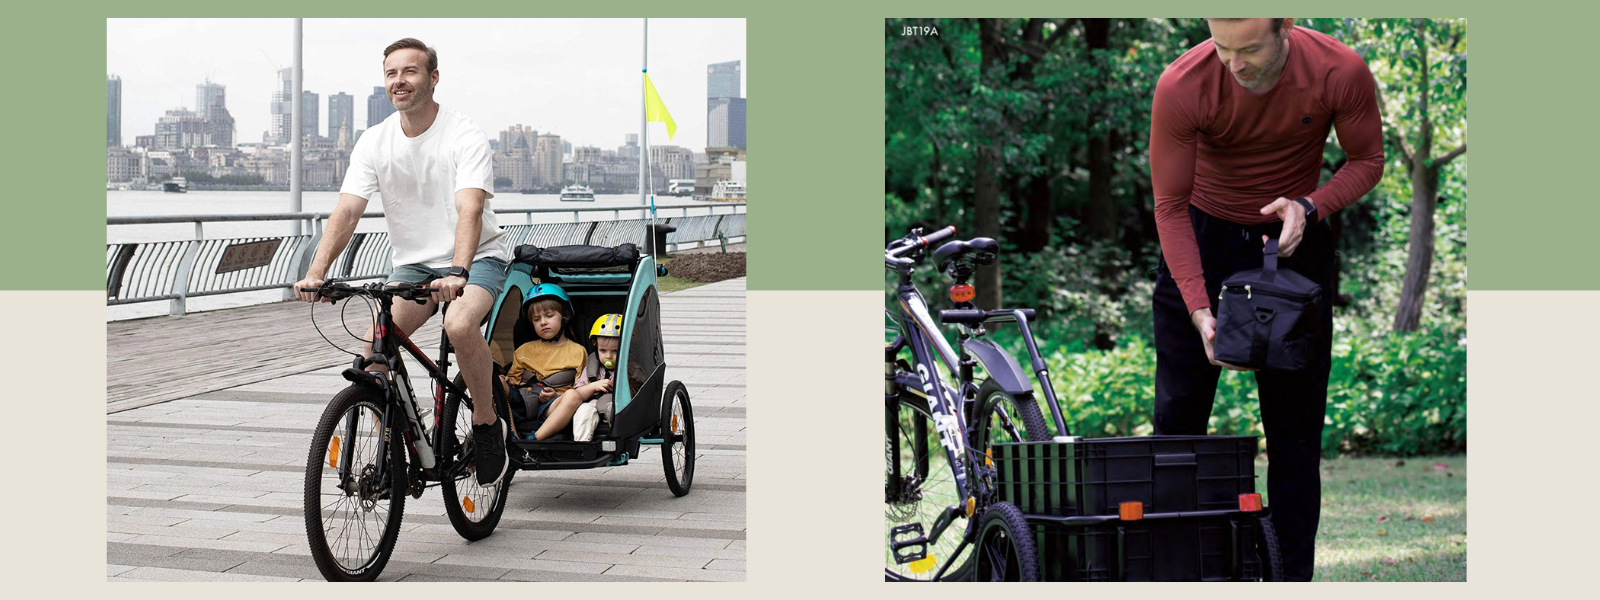 Bicycle trailers for child, pet and cargo